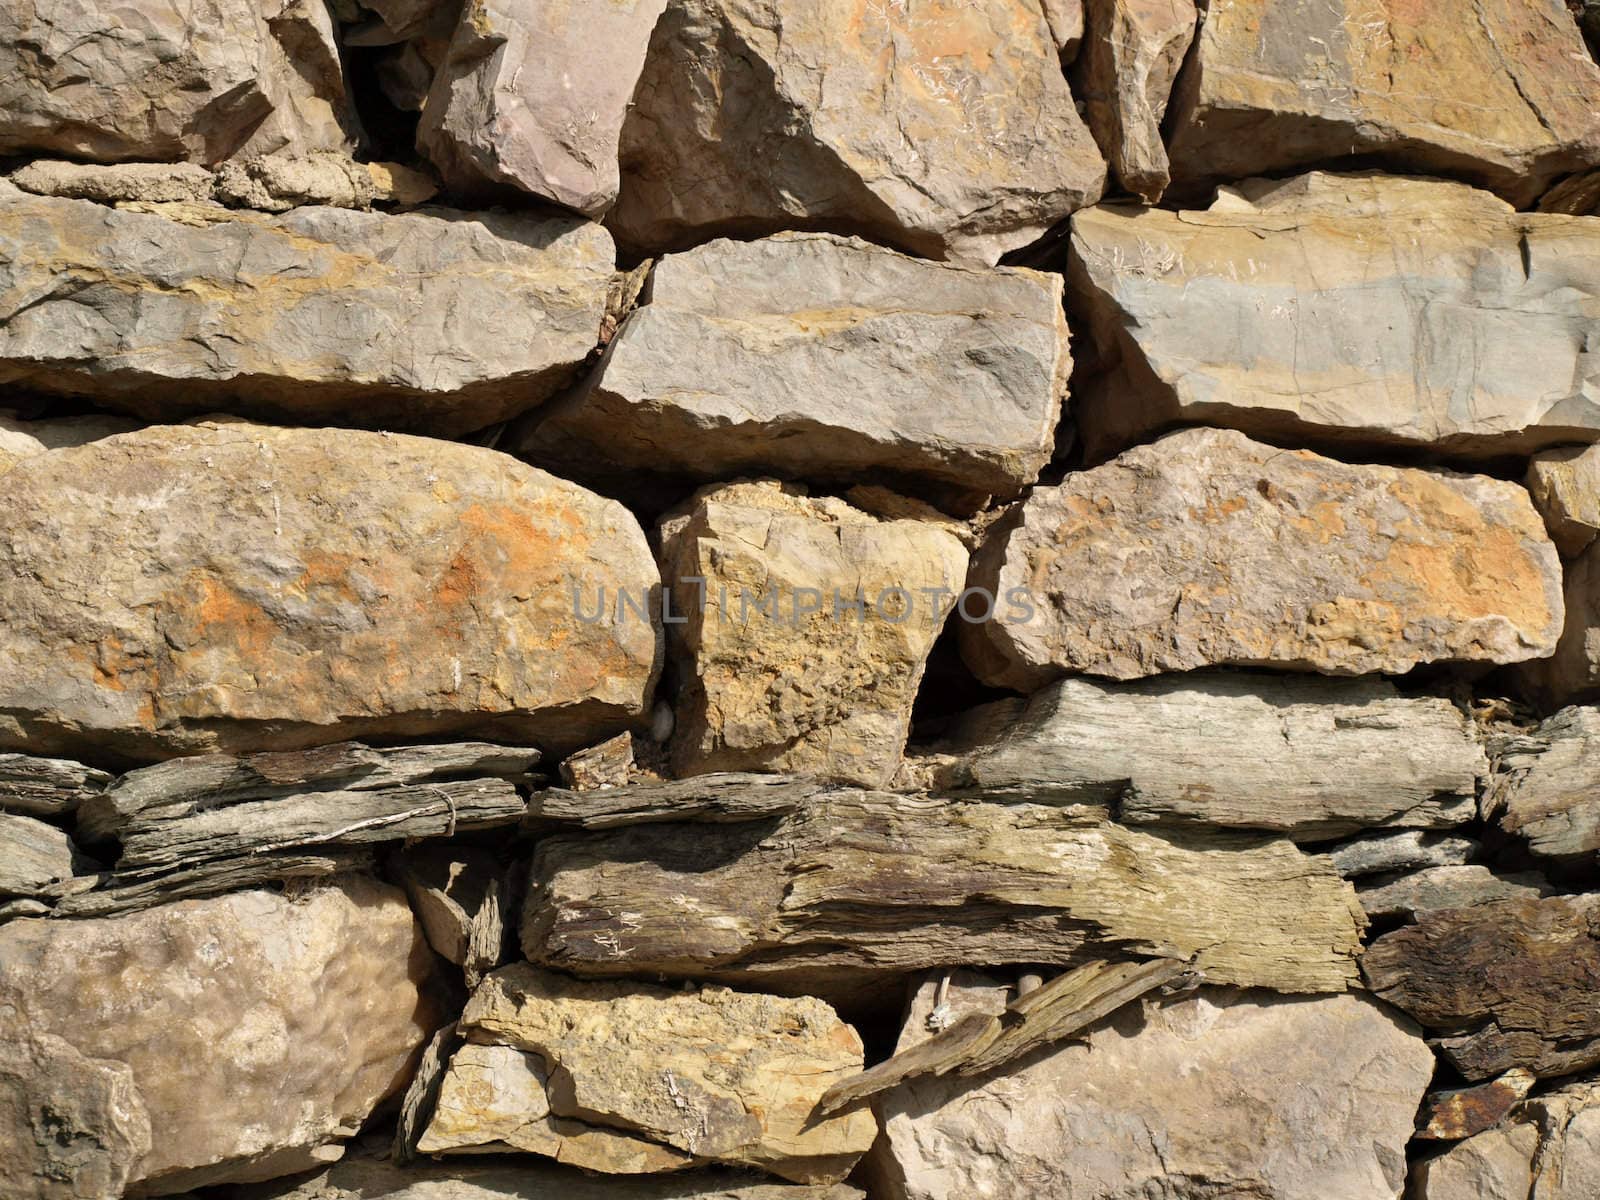 close-up image of a stone wall